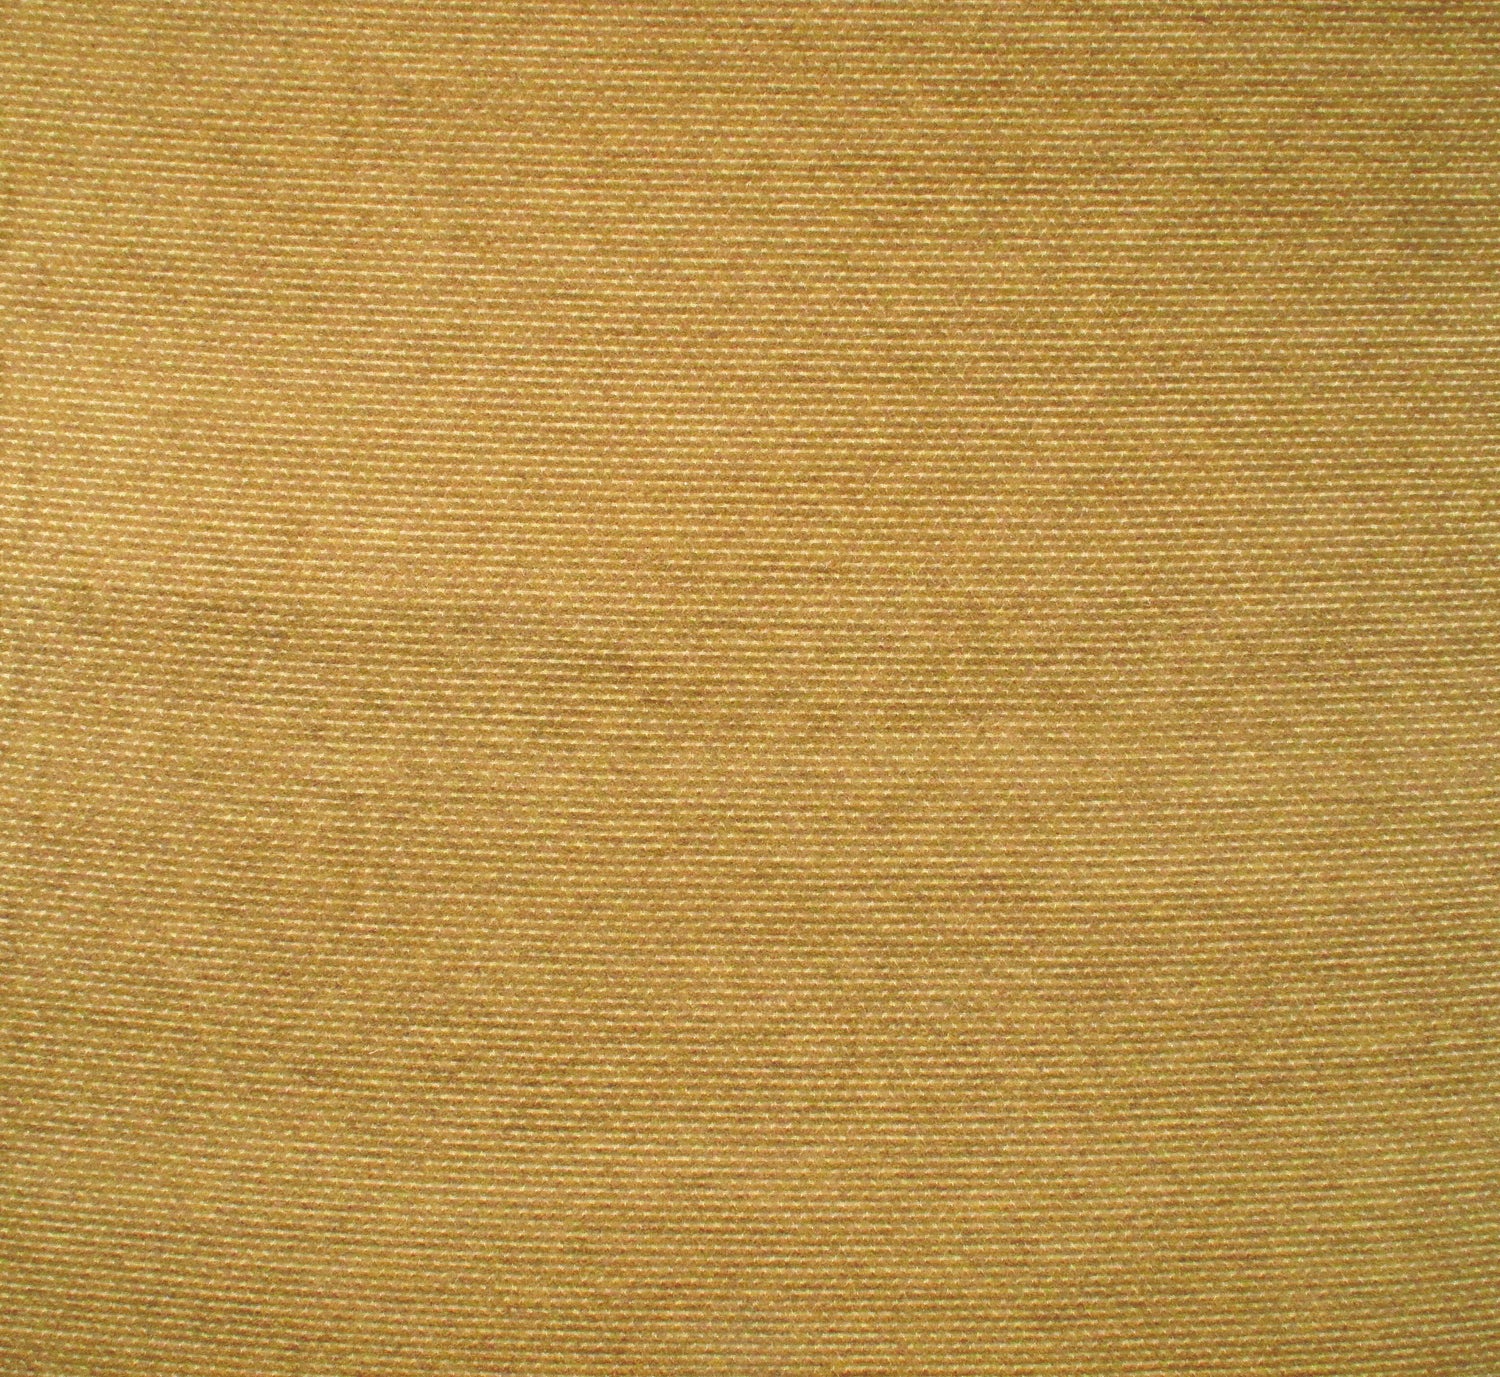 Yosemite fabric in honey color - pattern number PW 00031460 - by Scalamandre in the Old World Weavers collection